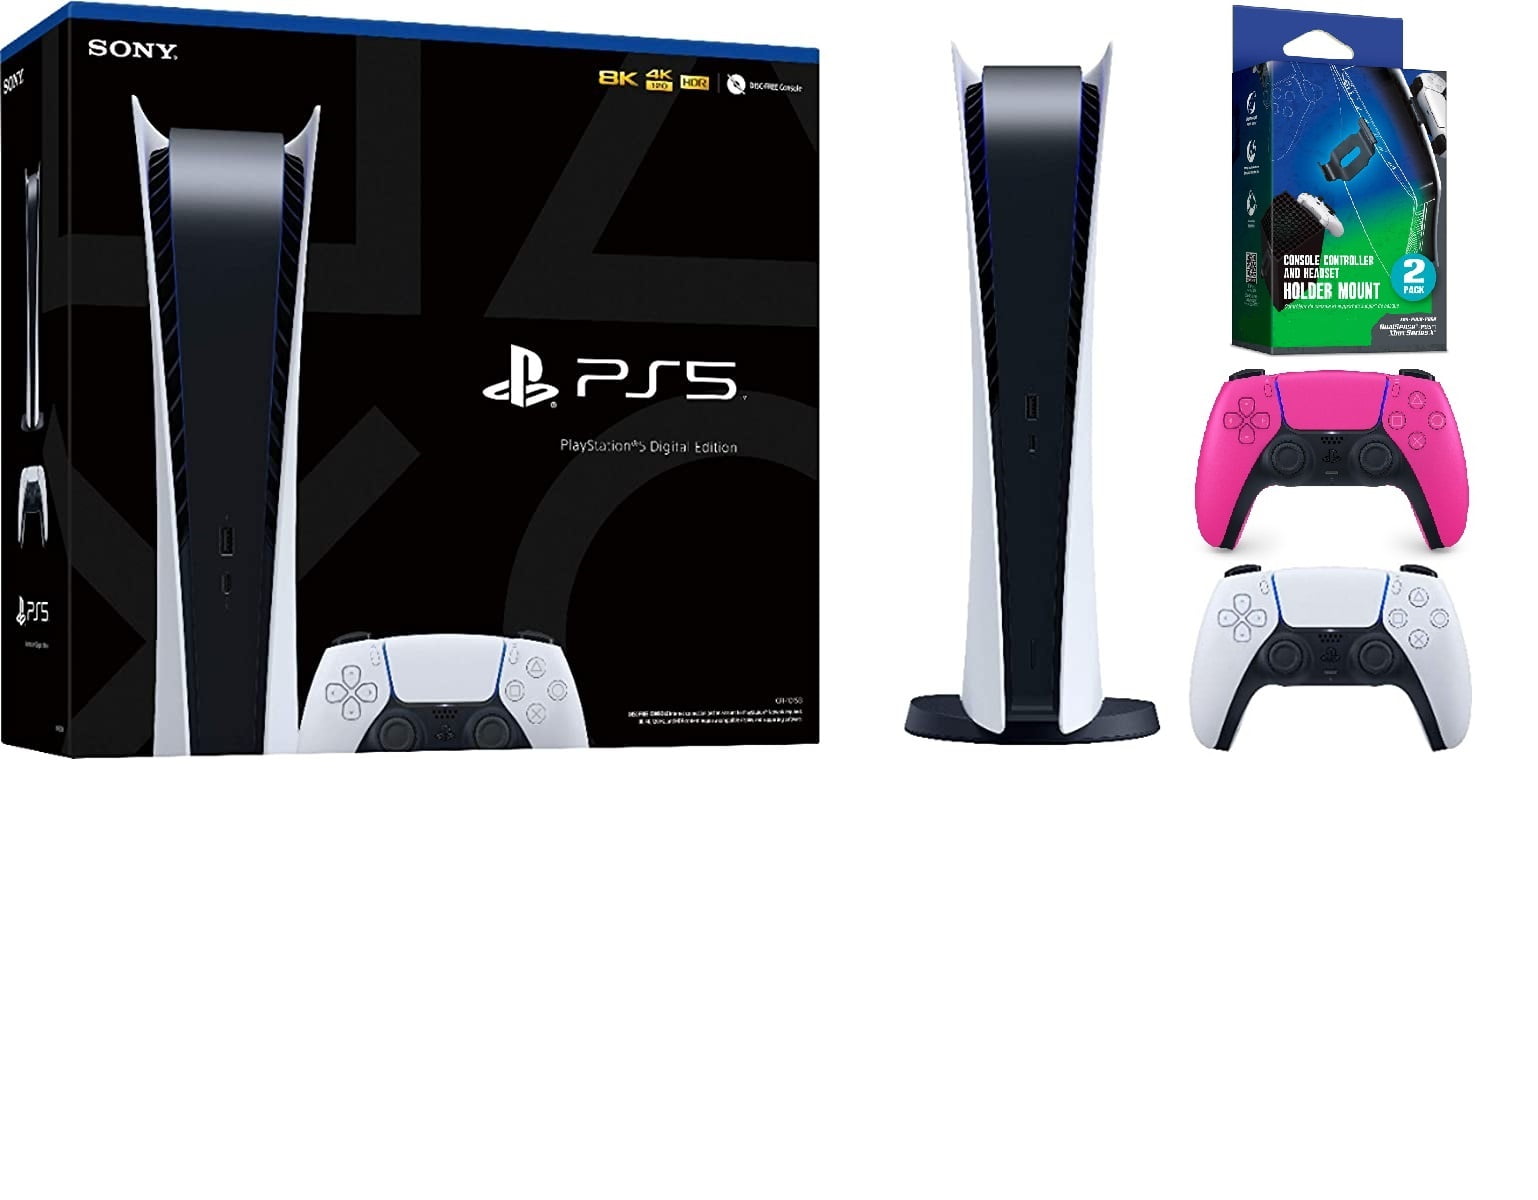 PS5 vs PS5 Digital Edition: which should you buy?